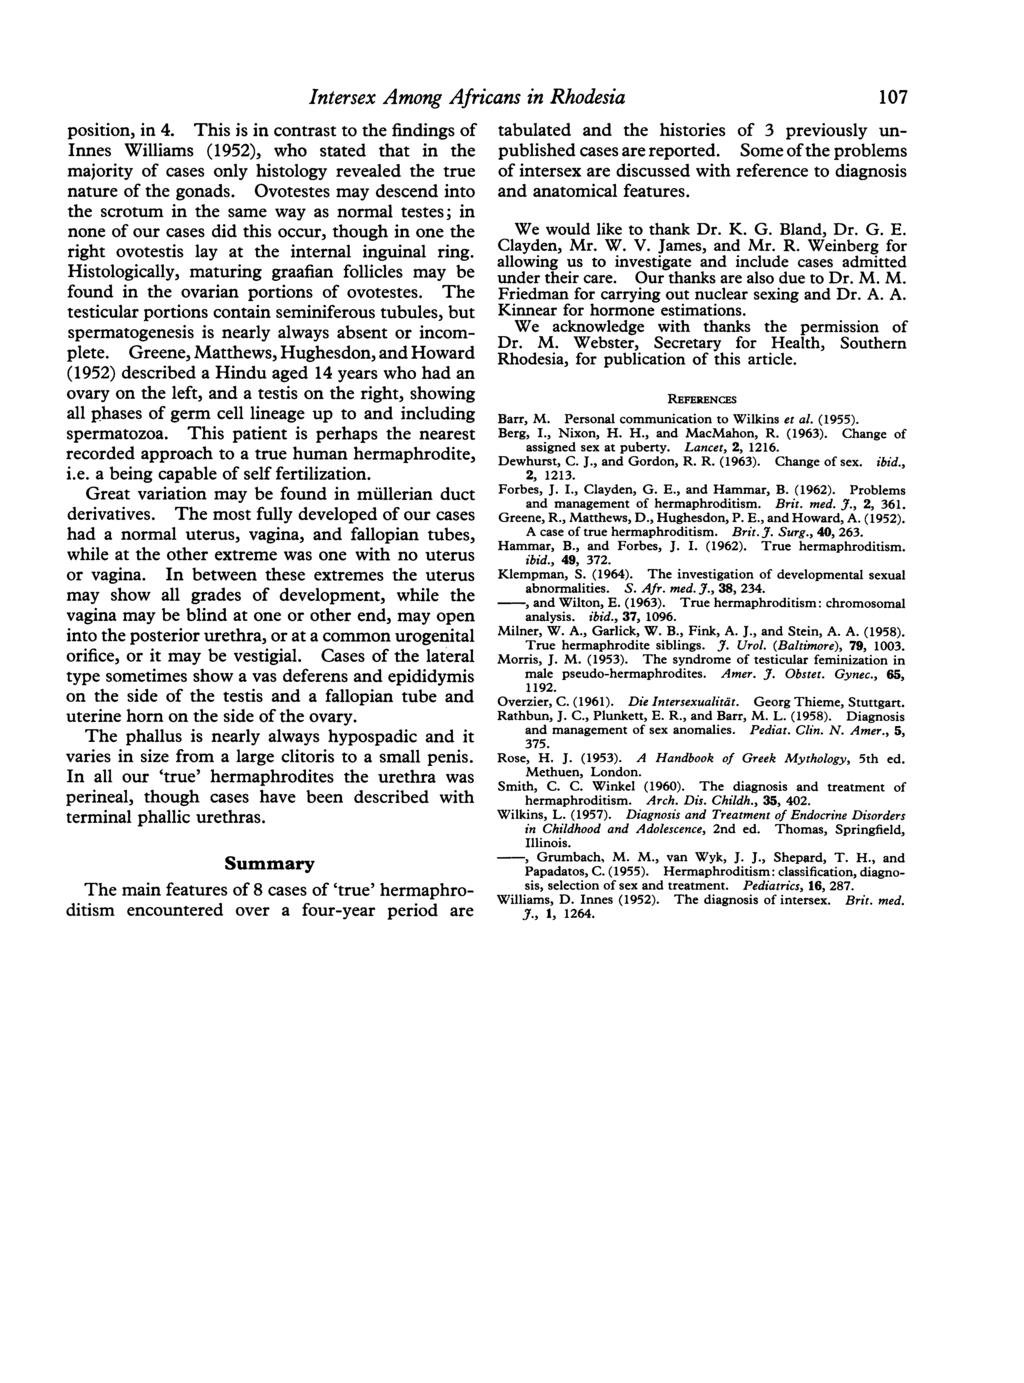 position, in 4. This is in contrast to the findings of Innes Williams (1952), who stated that in the majority of cases only histology revealed the true nature of the gonads.